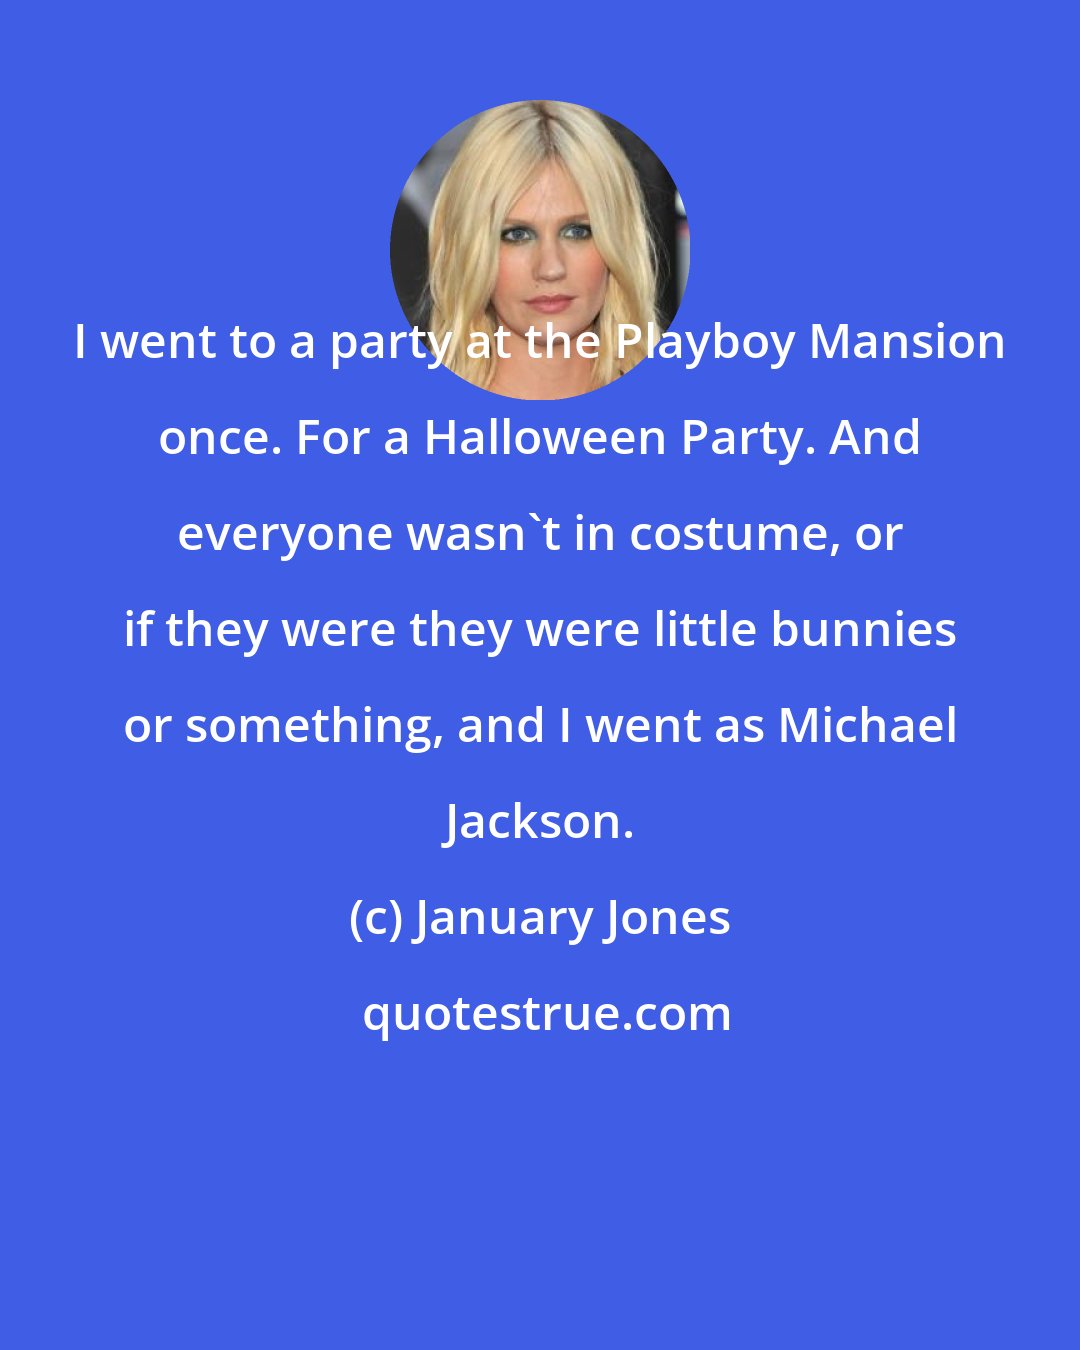 January Jones: I went to a party at the Playboy Mansion once. For a Halloween Party. And everyone wasn't in costume, or if they were they were little bunnies or something, and I went as Michael Jackson.